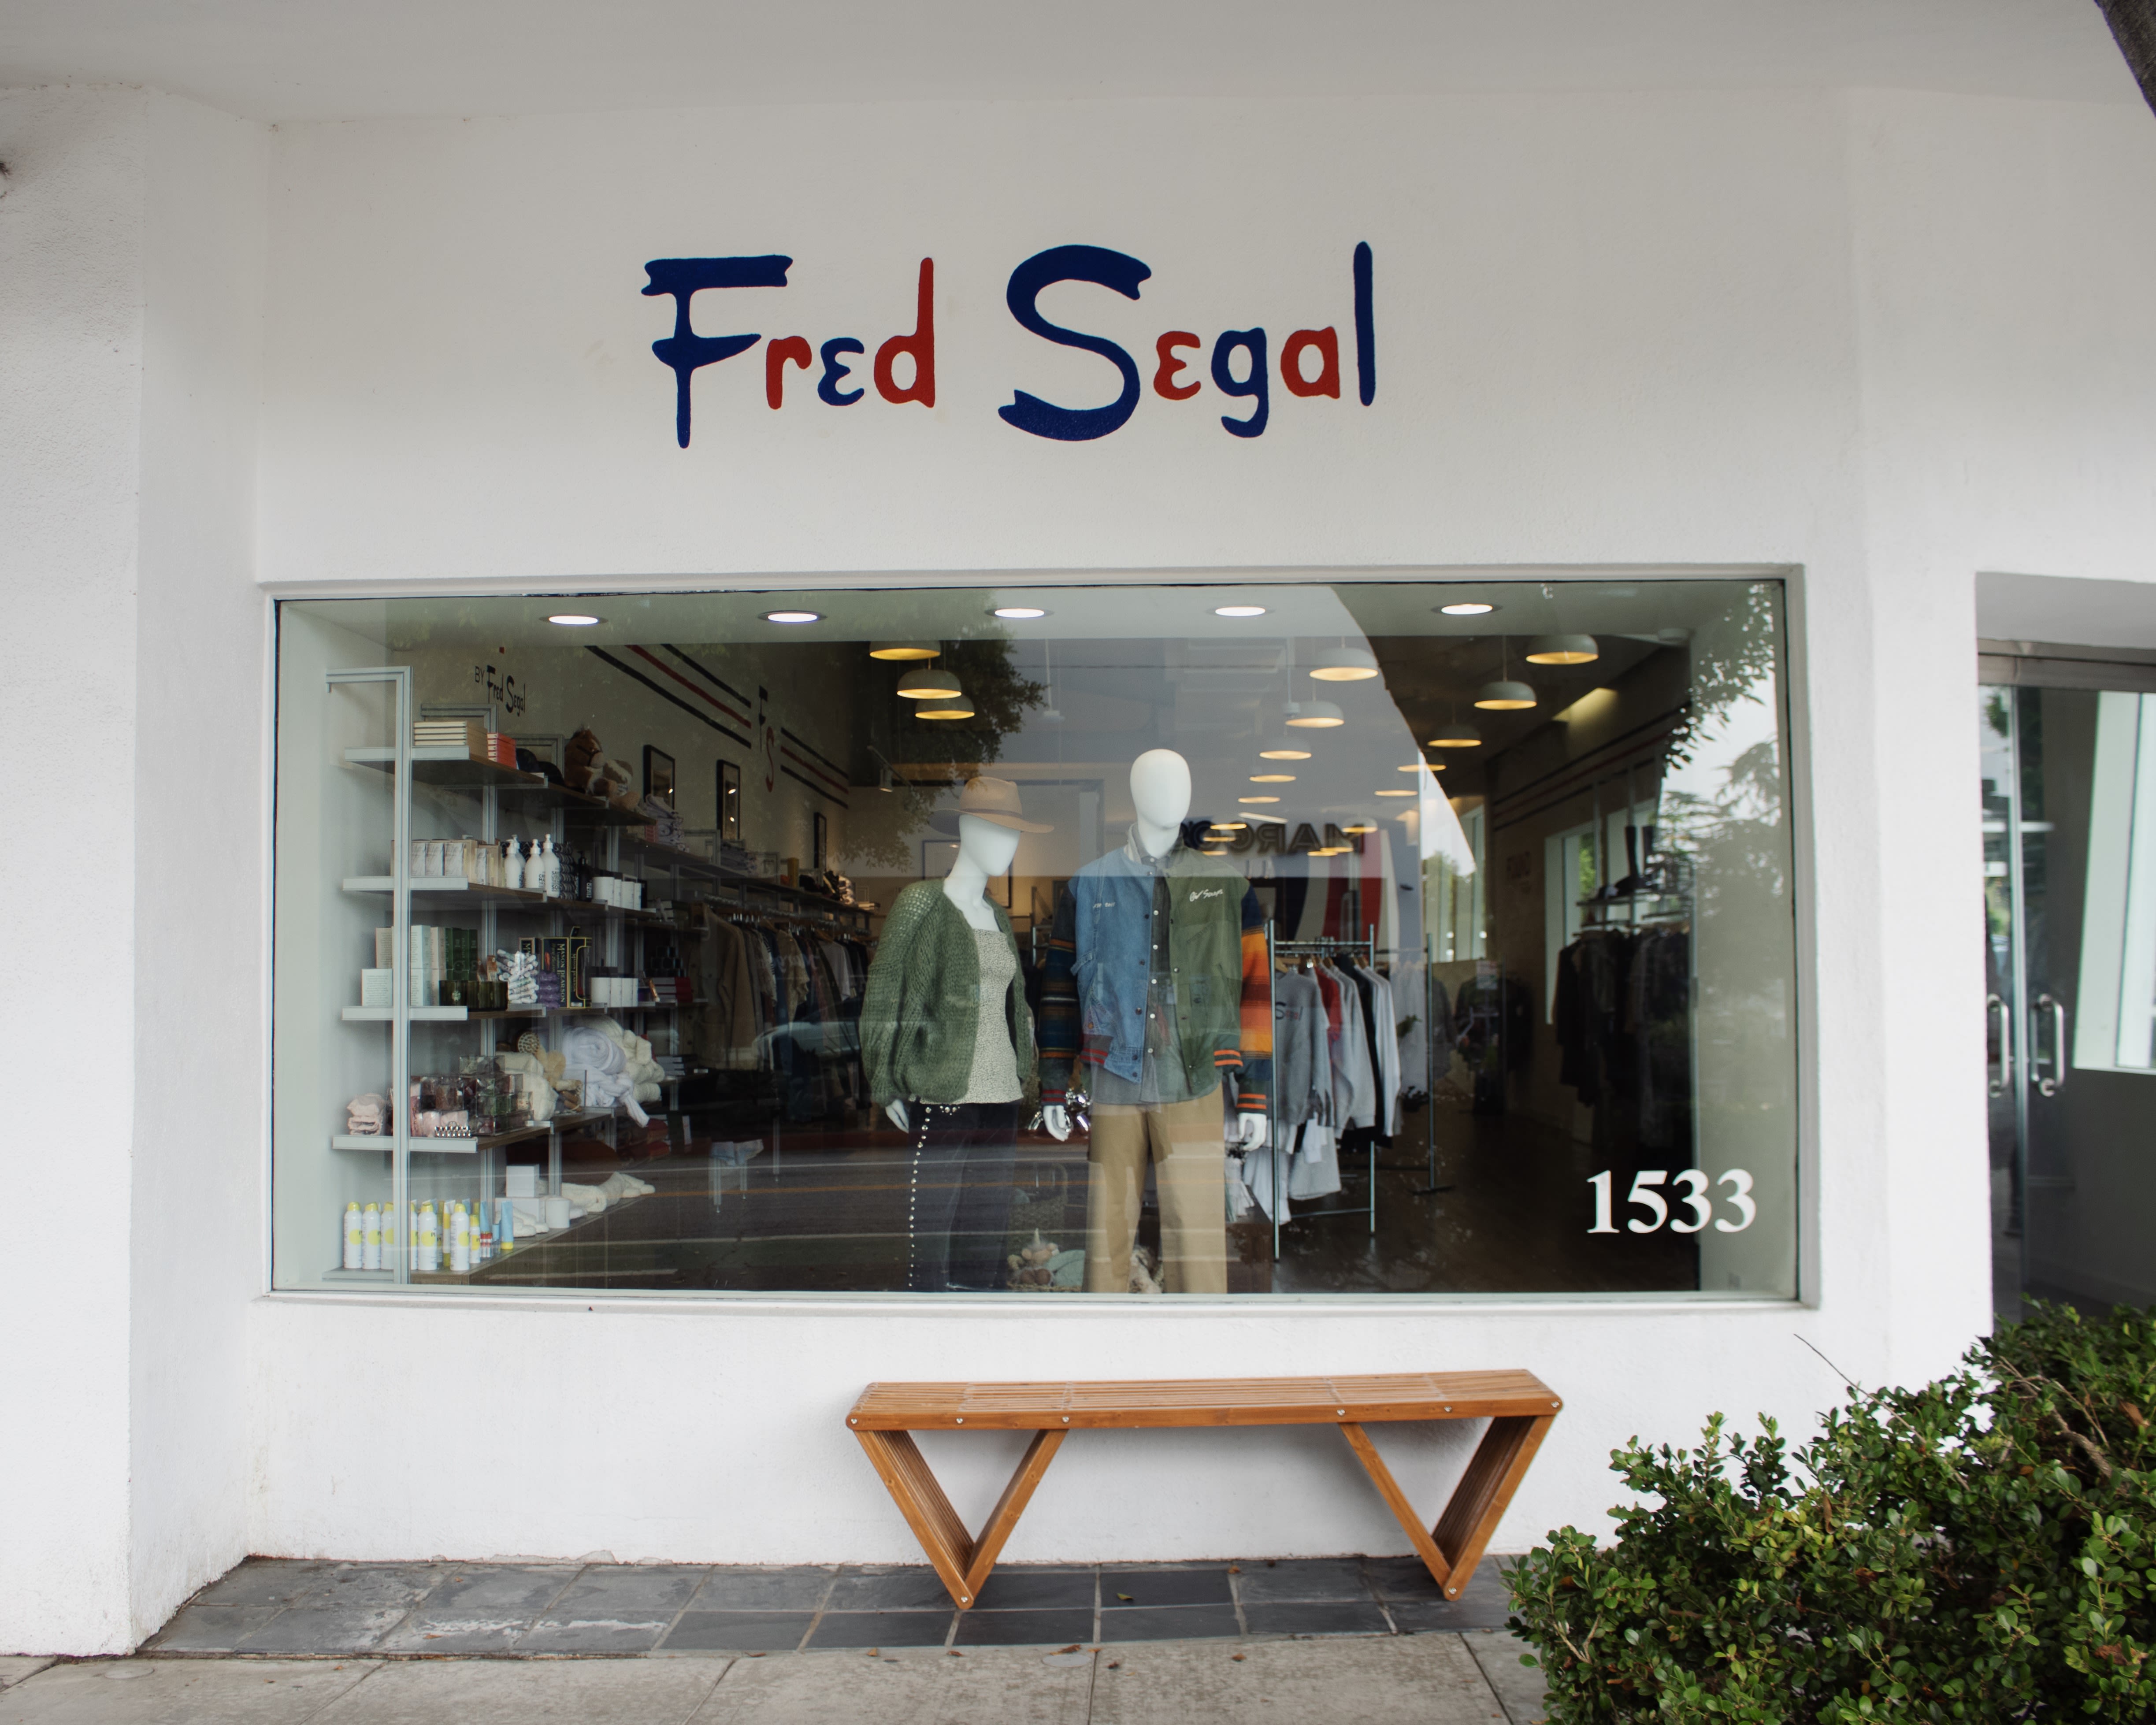 Fred Segal failed to compete in the 'very hard beast' of L.A. fashion retail. Here's what went wrong